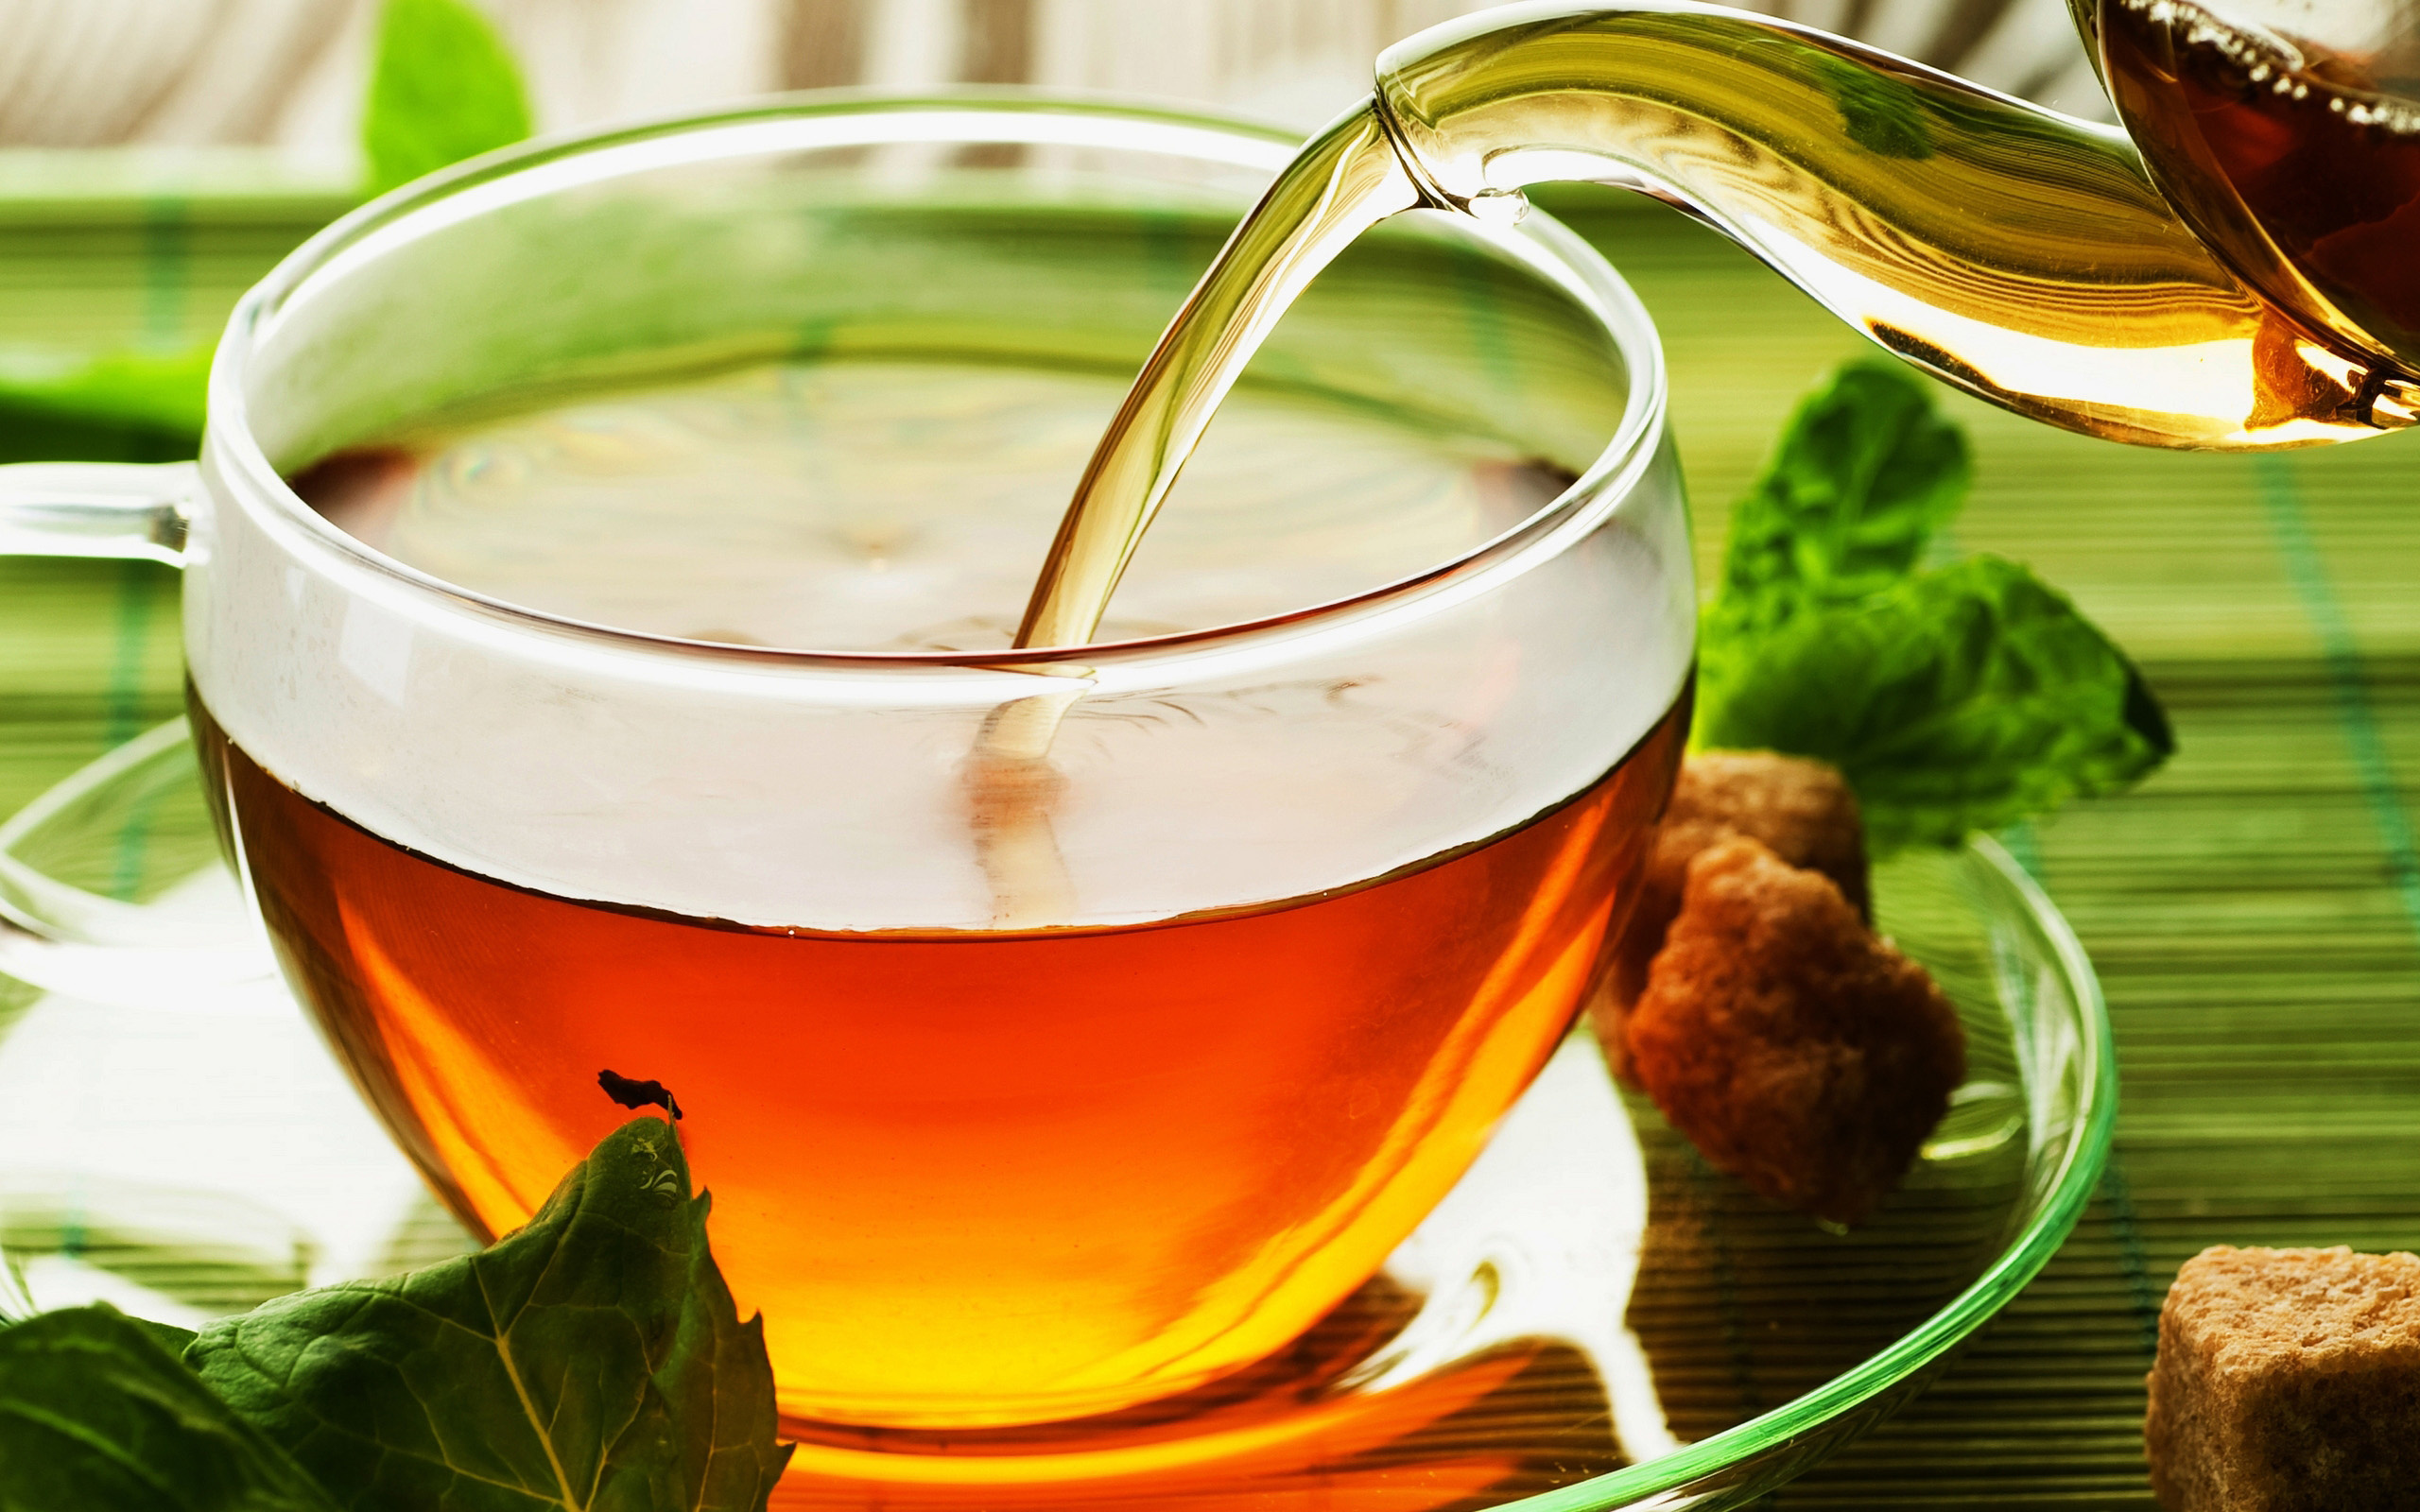 Tea: The world's most widely consumed beverage, A warm mug. 2560x1600 HD Wallpaper.